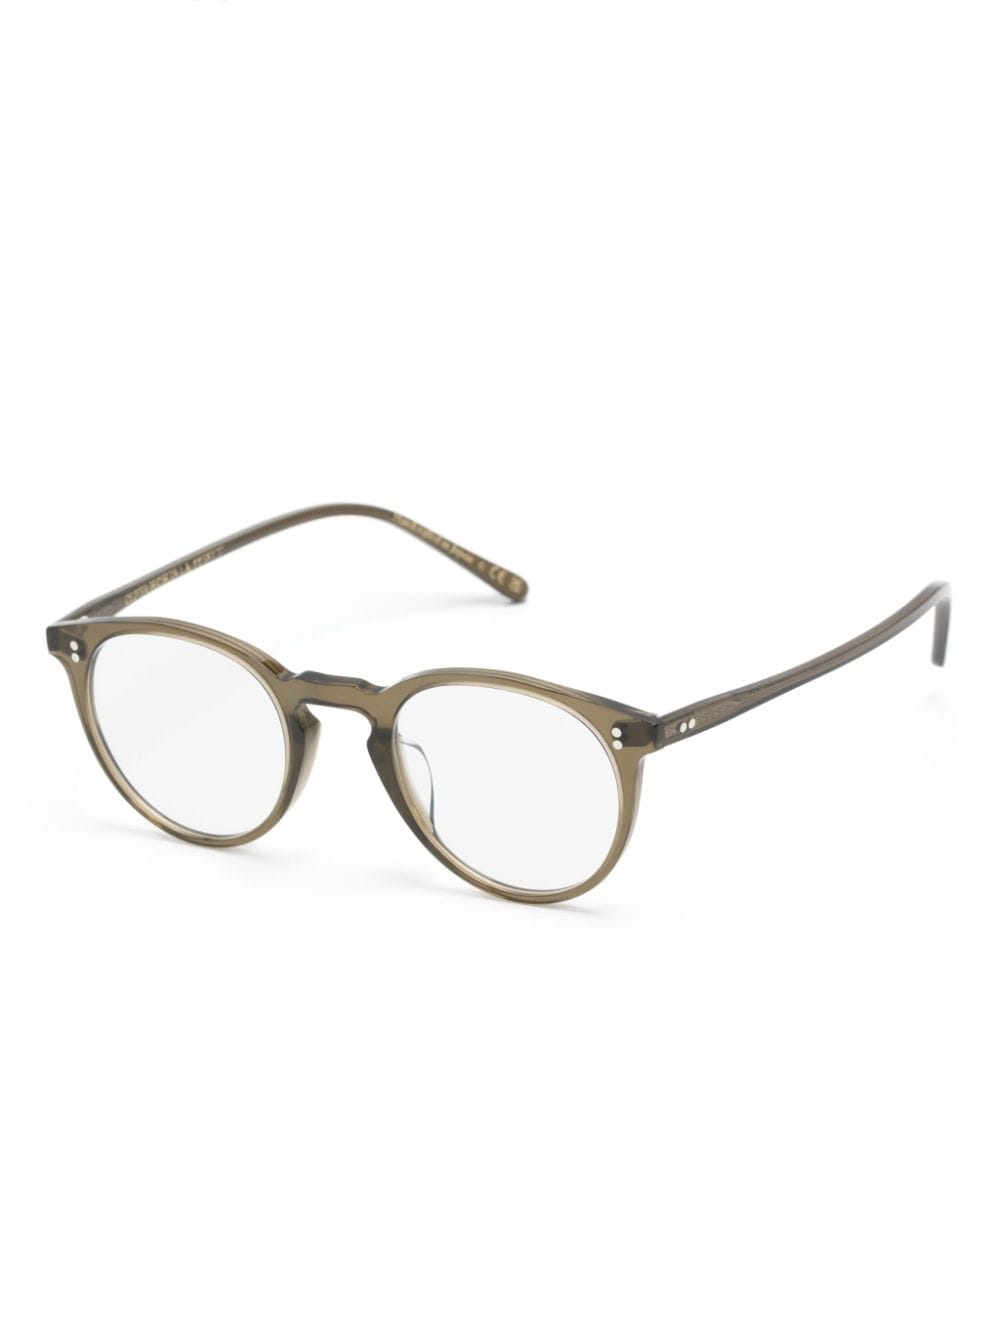 Image 2 of Oliver Peoples O'Malley round-frame glasses